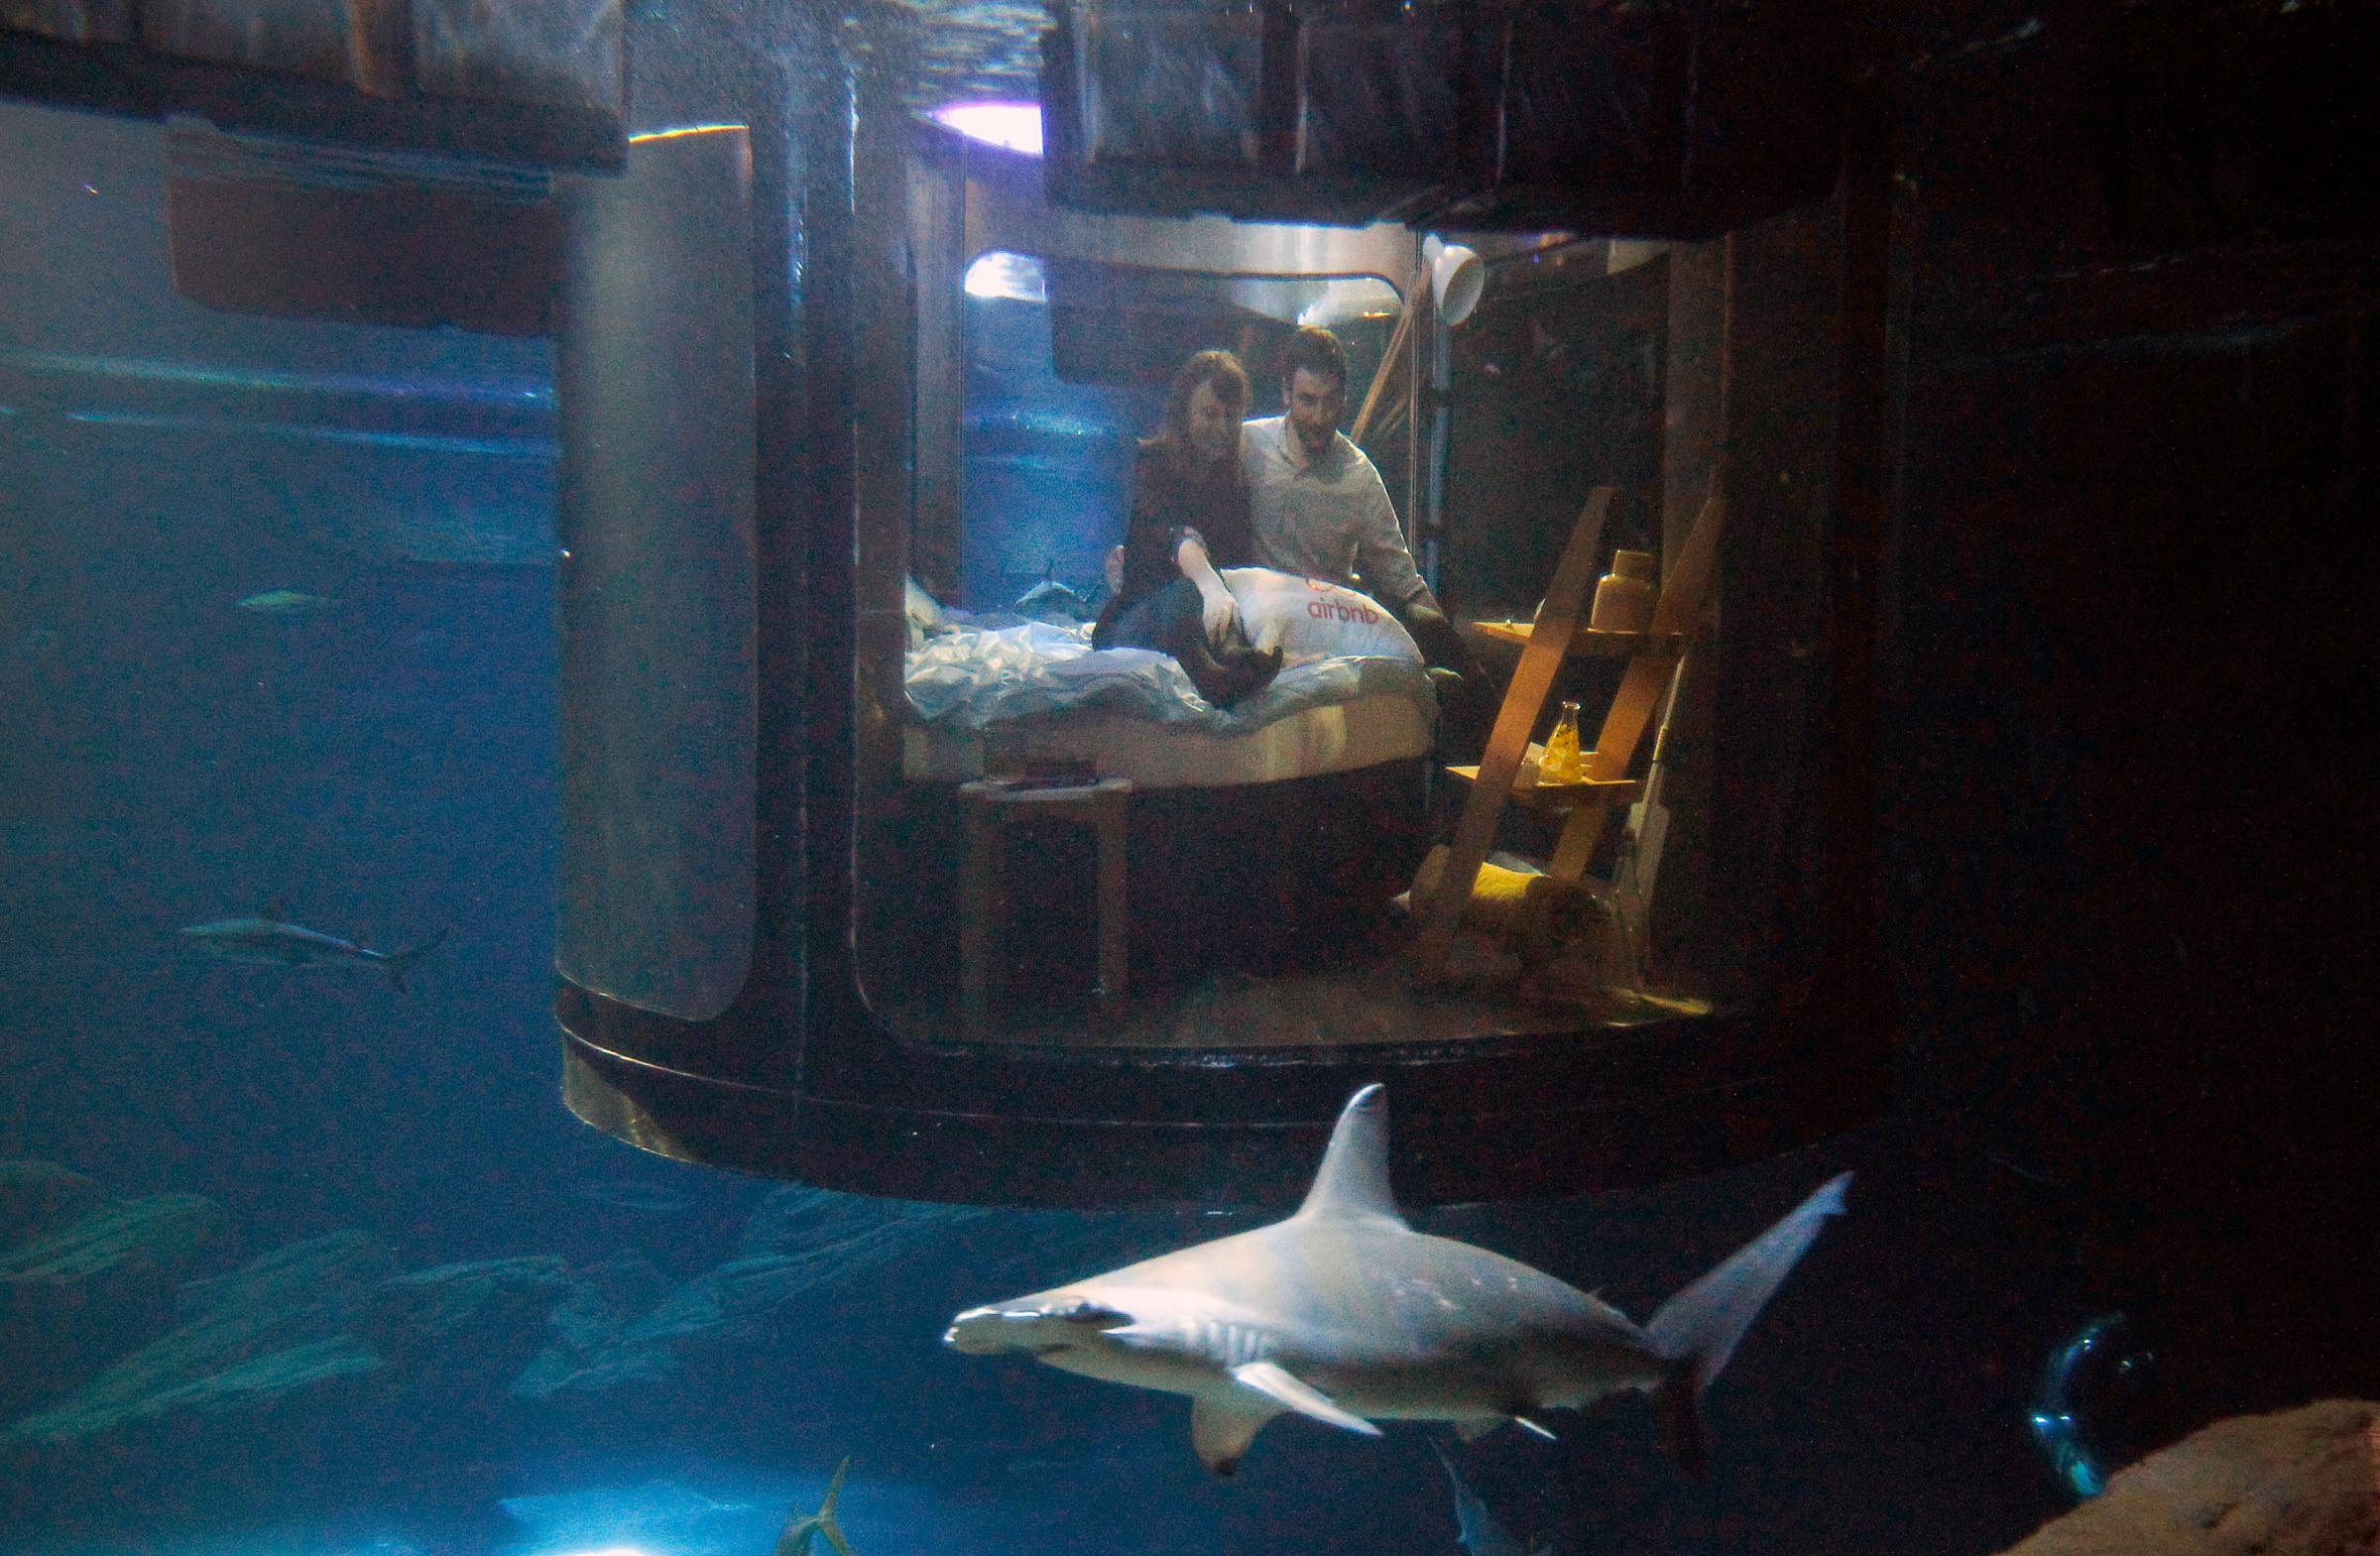 Alister Shipman from Britain, right, and Hannah Simpson from Northern Ireland, winners of a competition on the Airbnb accommodation site pose in a bed of an underwater room structure installed in the Aquarium of Paris, in Paris, on April 11, 2016.